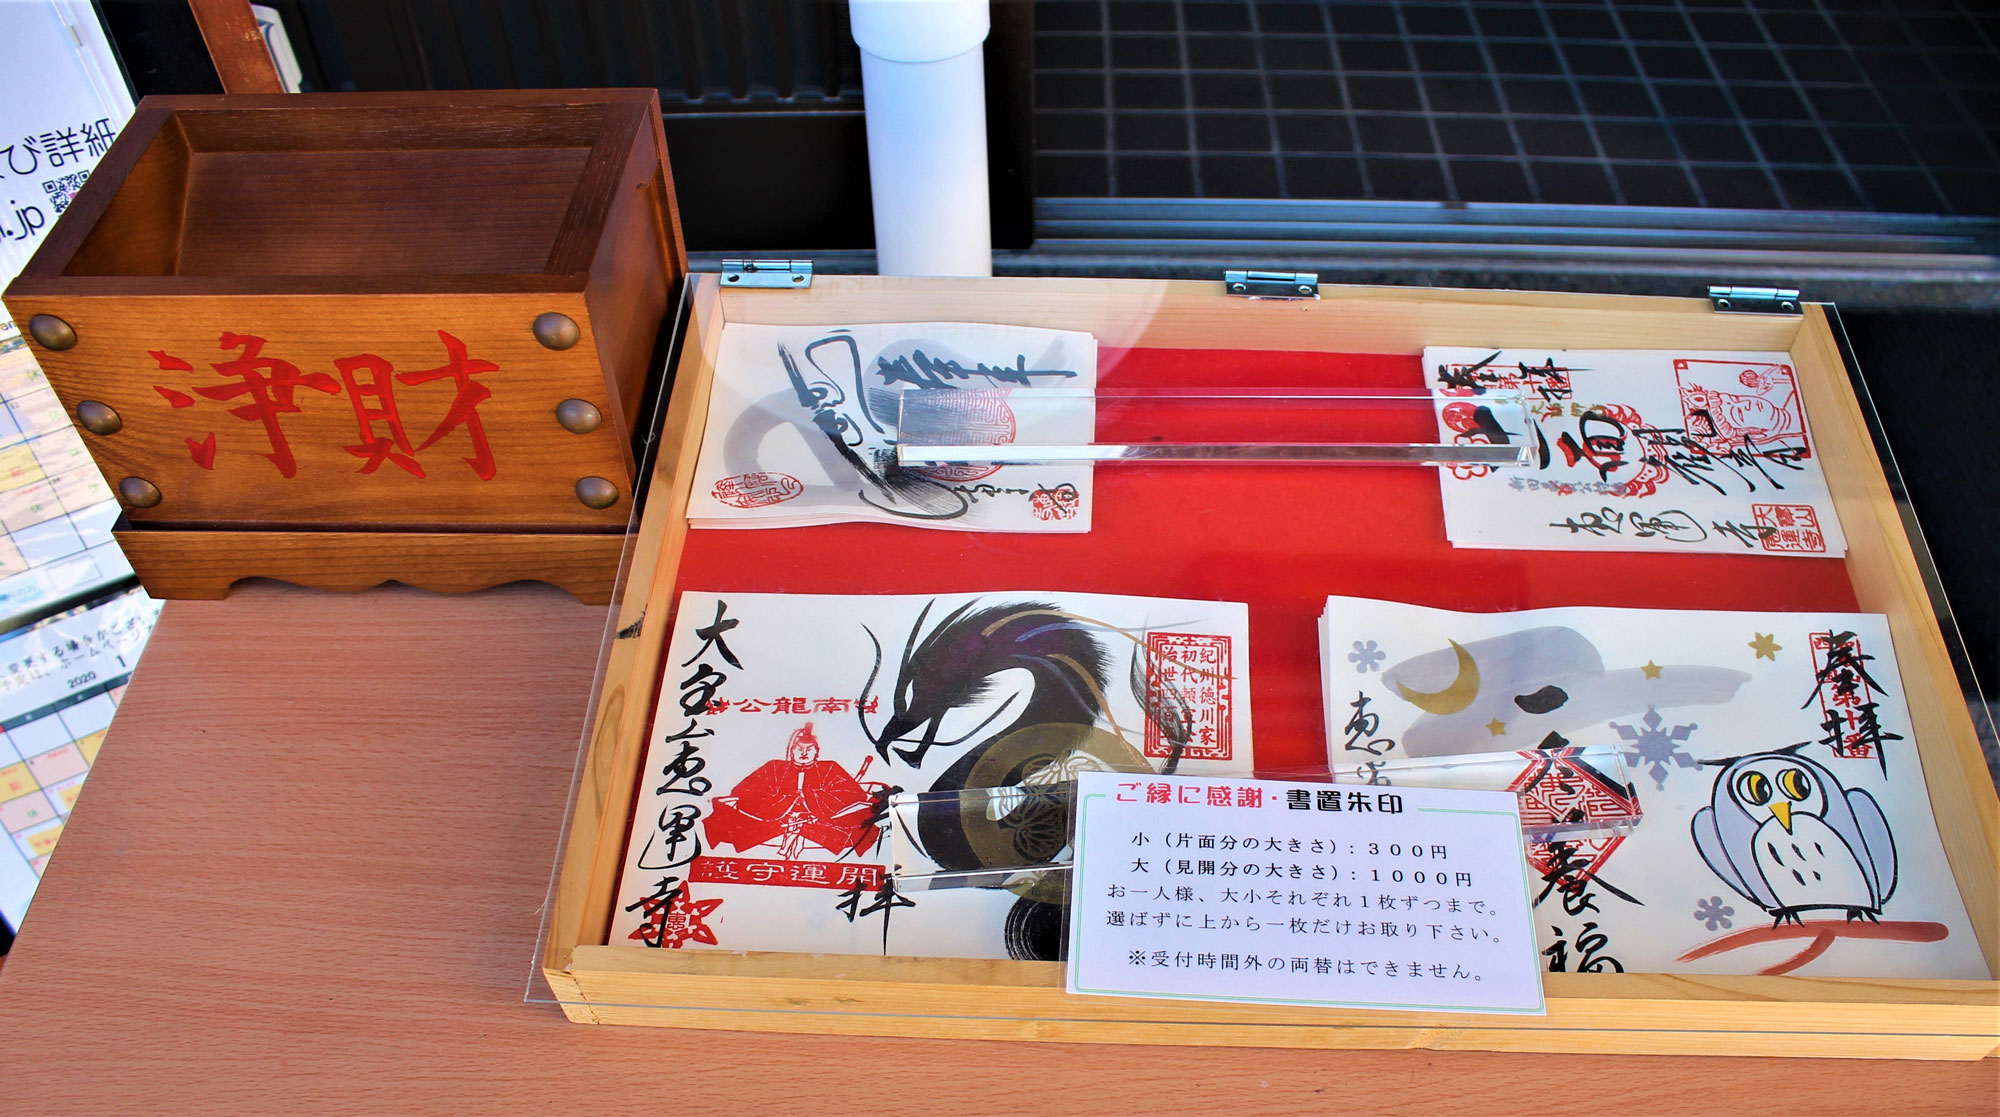 Unmanned sales of  Goshuin ( red stamp)  (This is a style where you put your money in the donation box and take it home. You can take it home anytime regardless of the Goshuin(red stamp)  schedule.)の写真